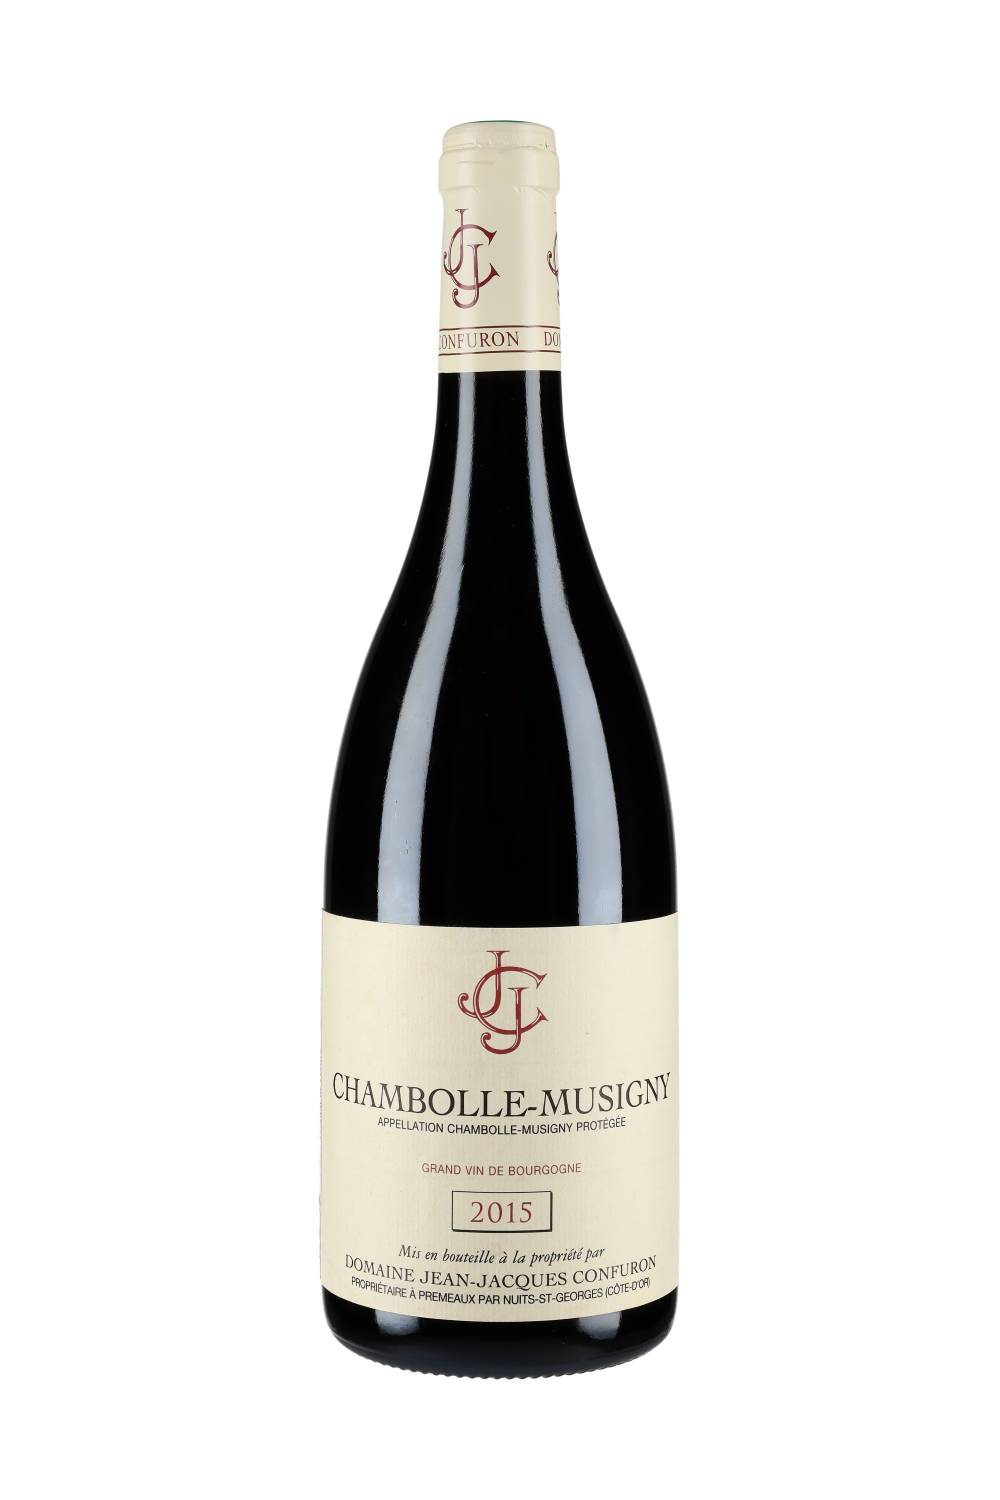 Domaine Jean-Jacques Confuron Chambolle-Musigny 2015